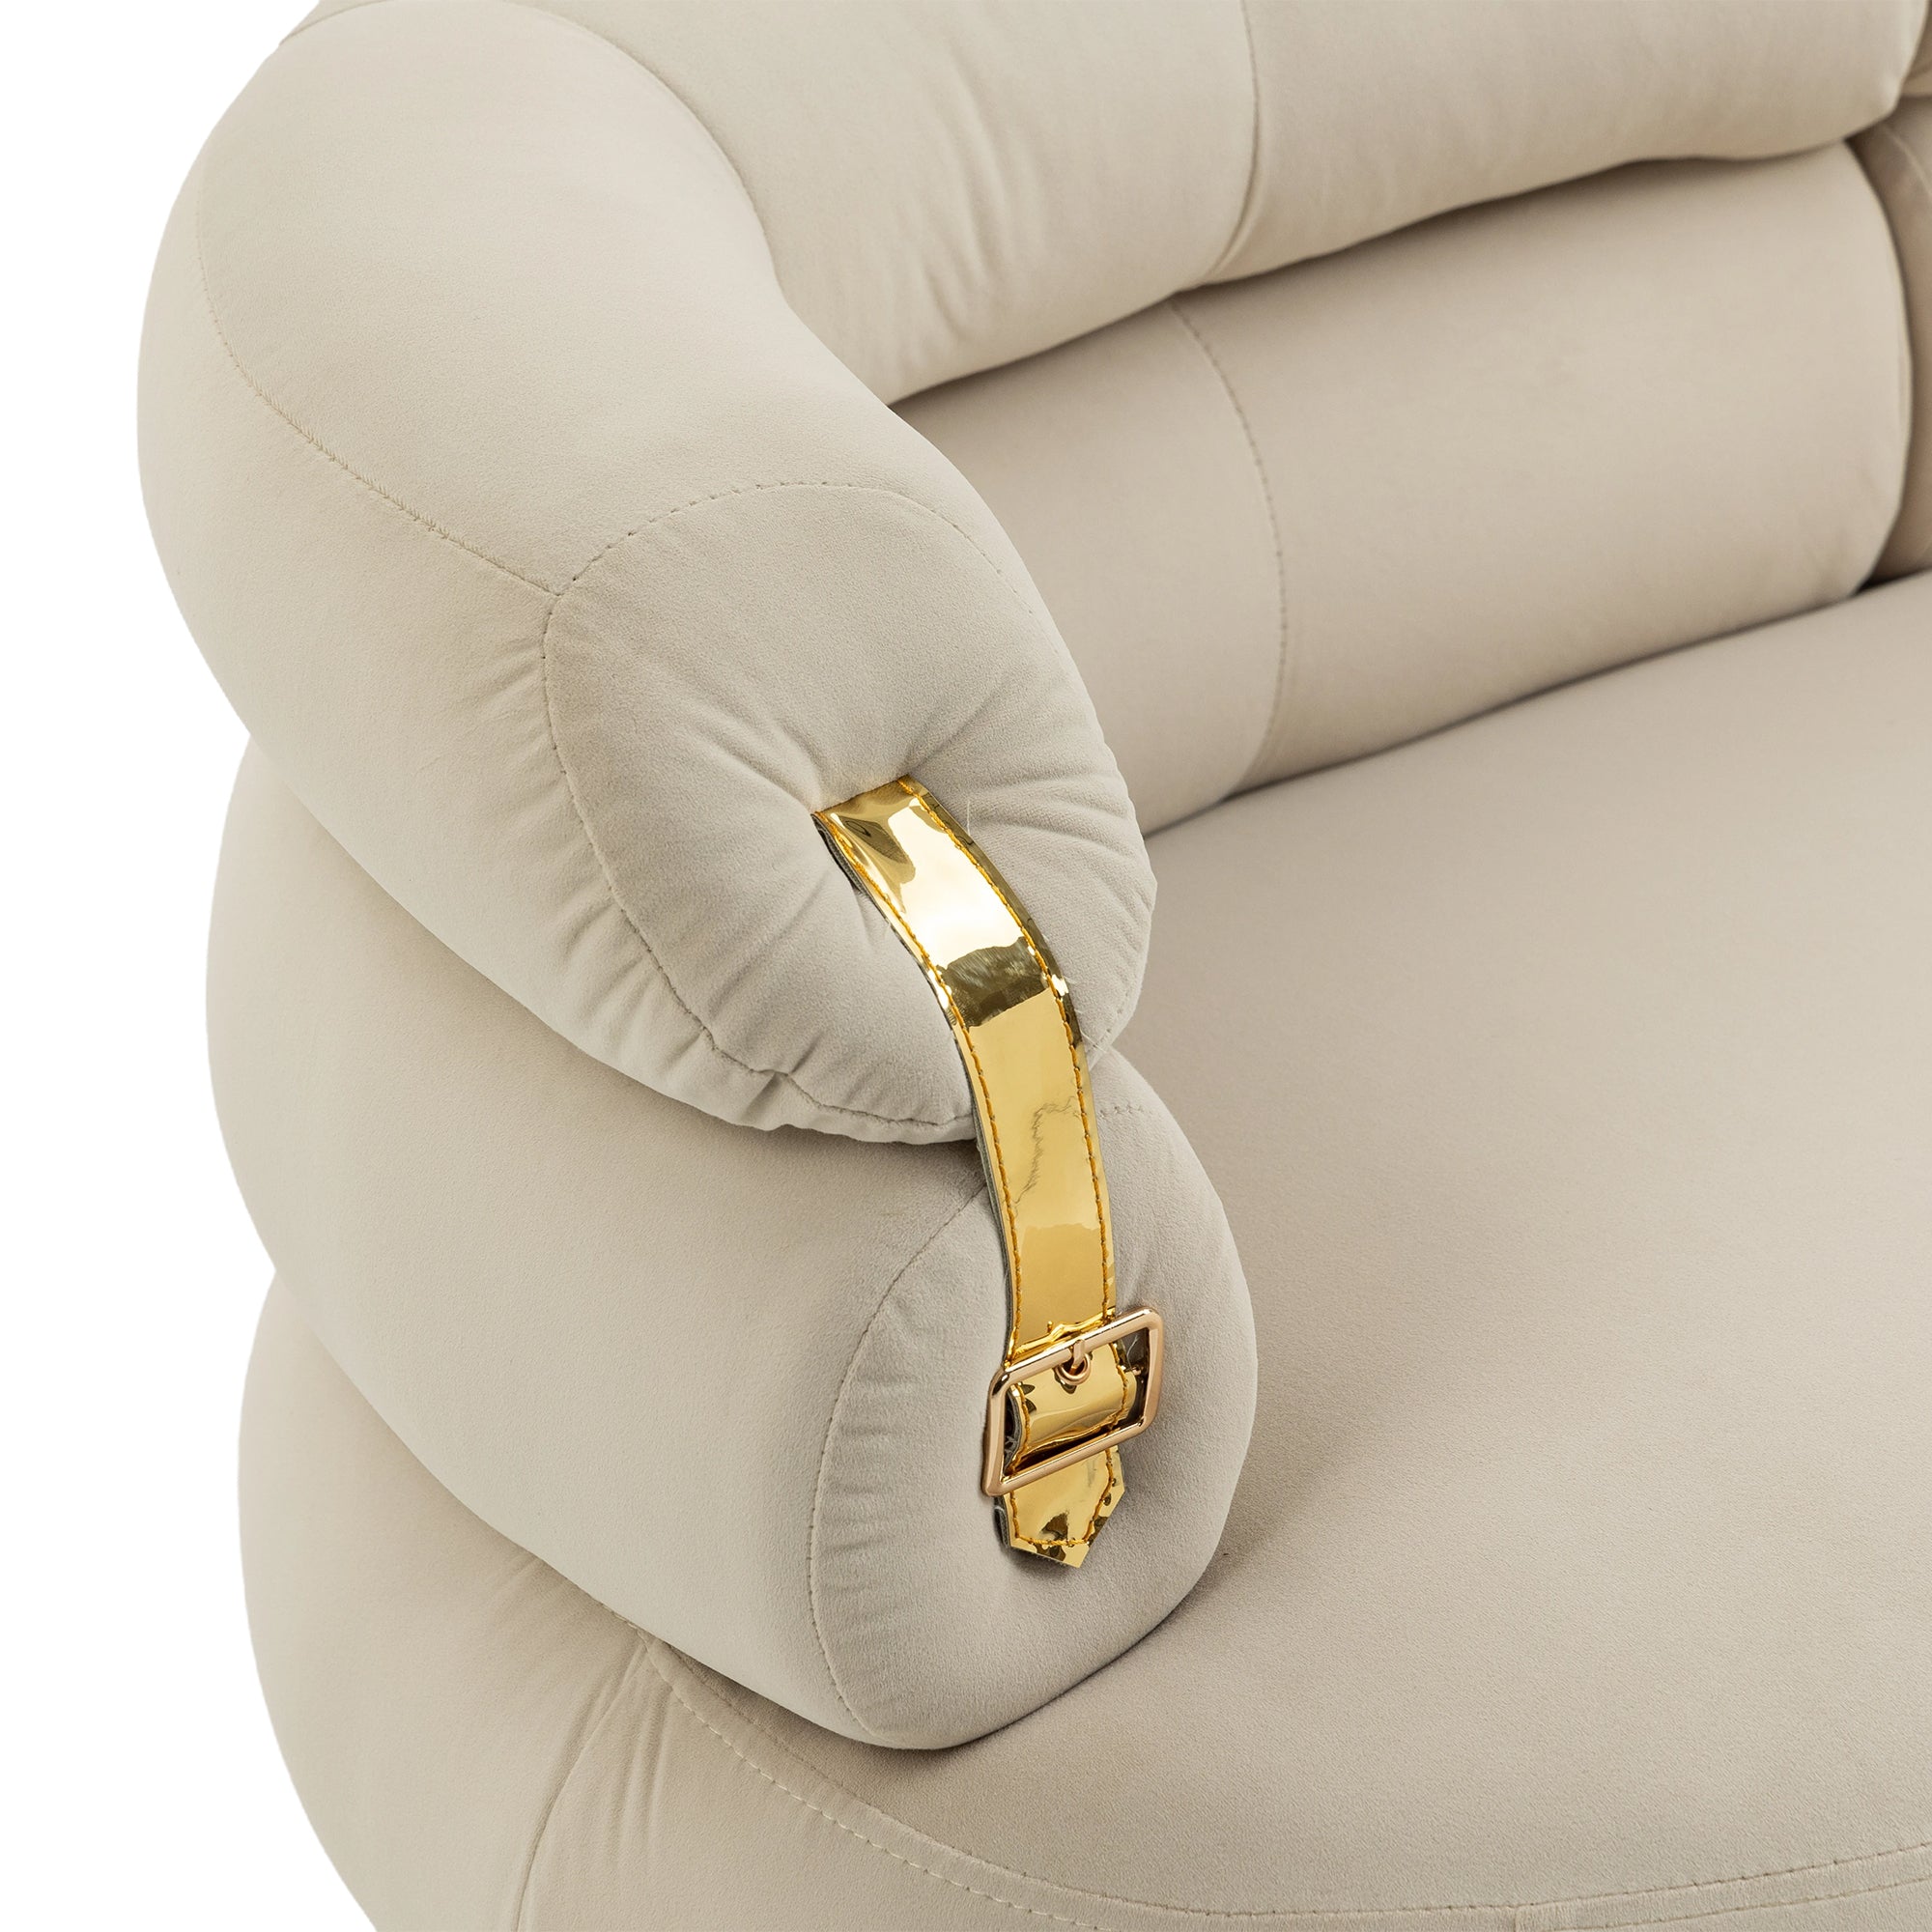 COOLMORE Accent Chair ,leisure chair with Golden feet beige-velvet